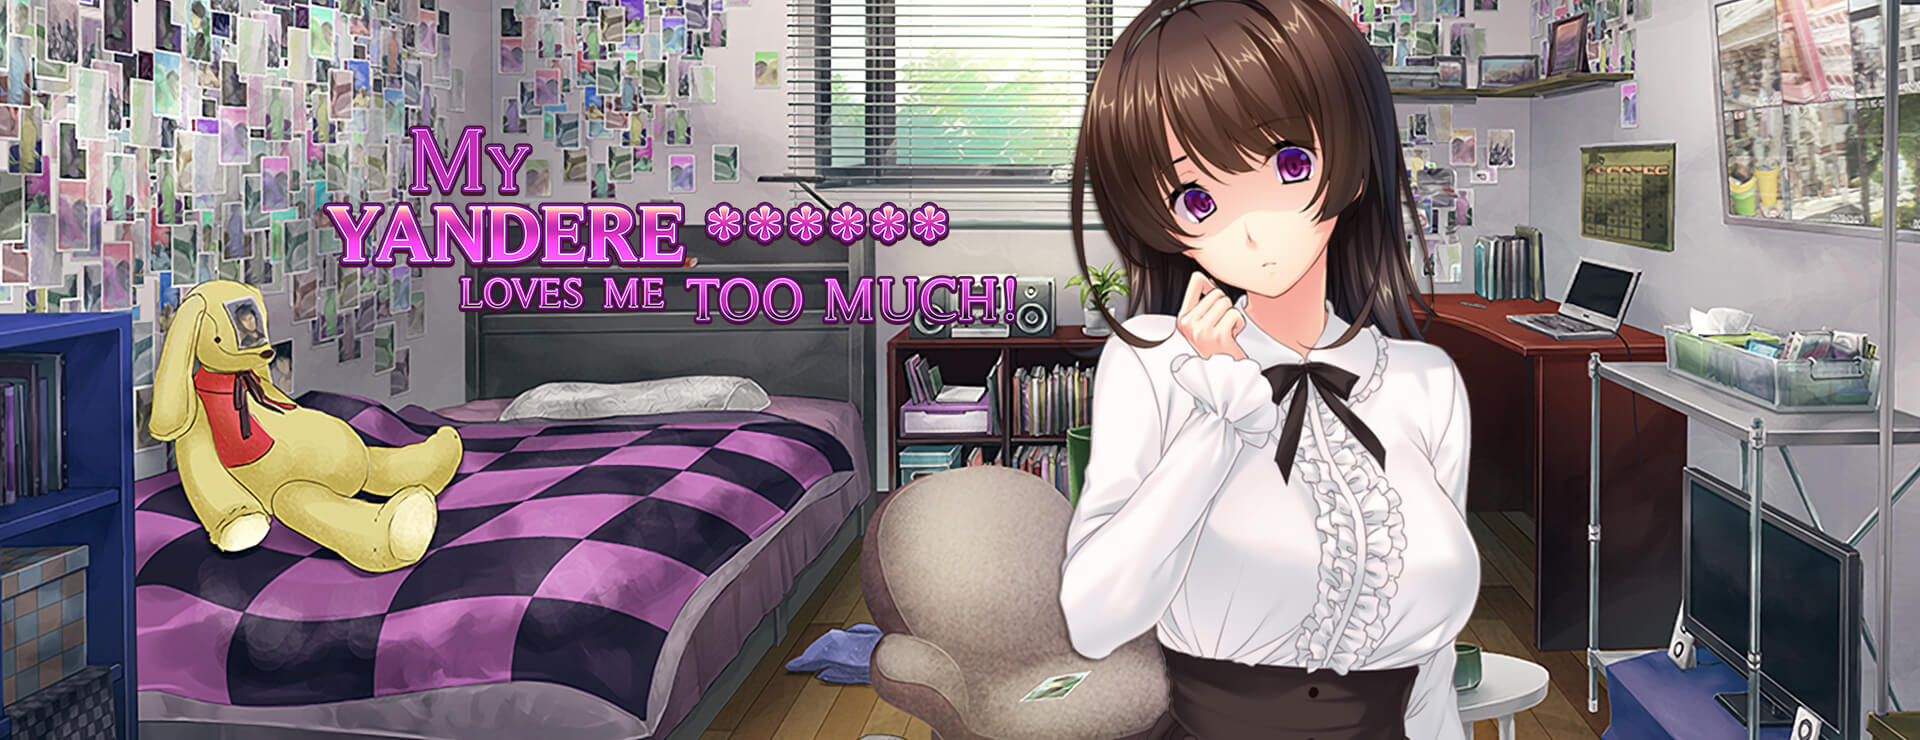 My Yandere Loves Me Too Much - Action Adventure Game